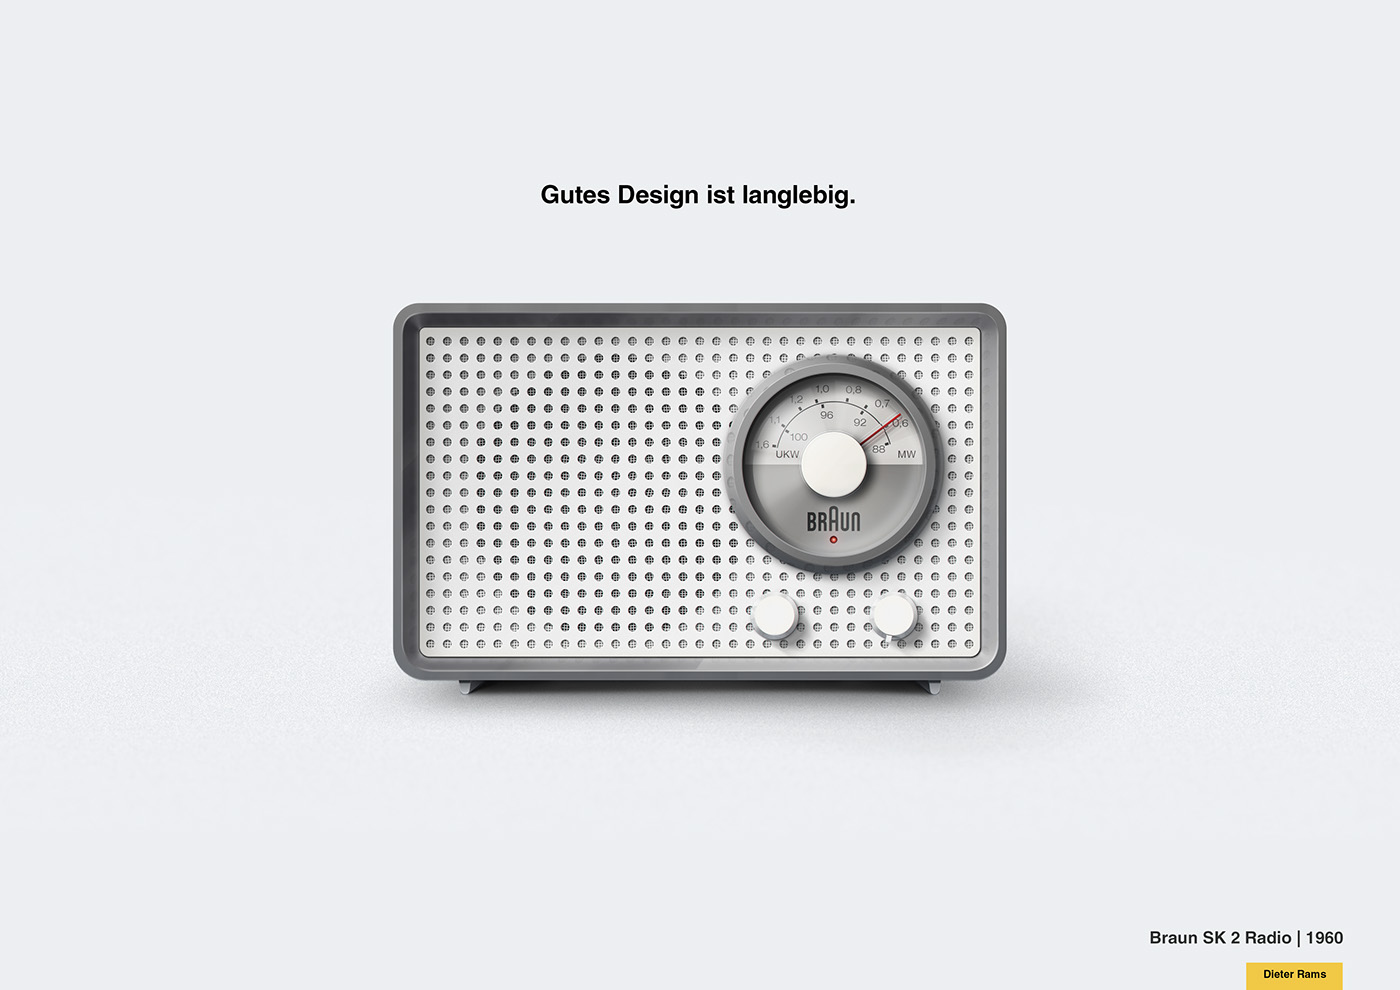 An ad for the Braun SK 2 Radio from 1960 using Dieter Rams' slogan 'Gutes Design ist langlebig'.